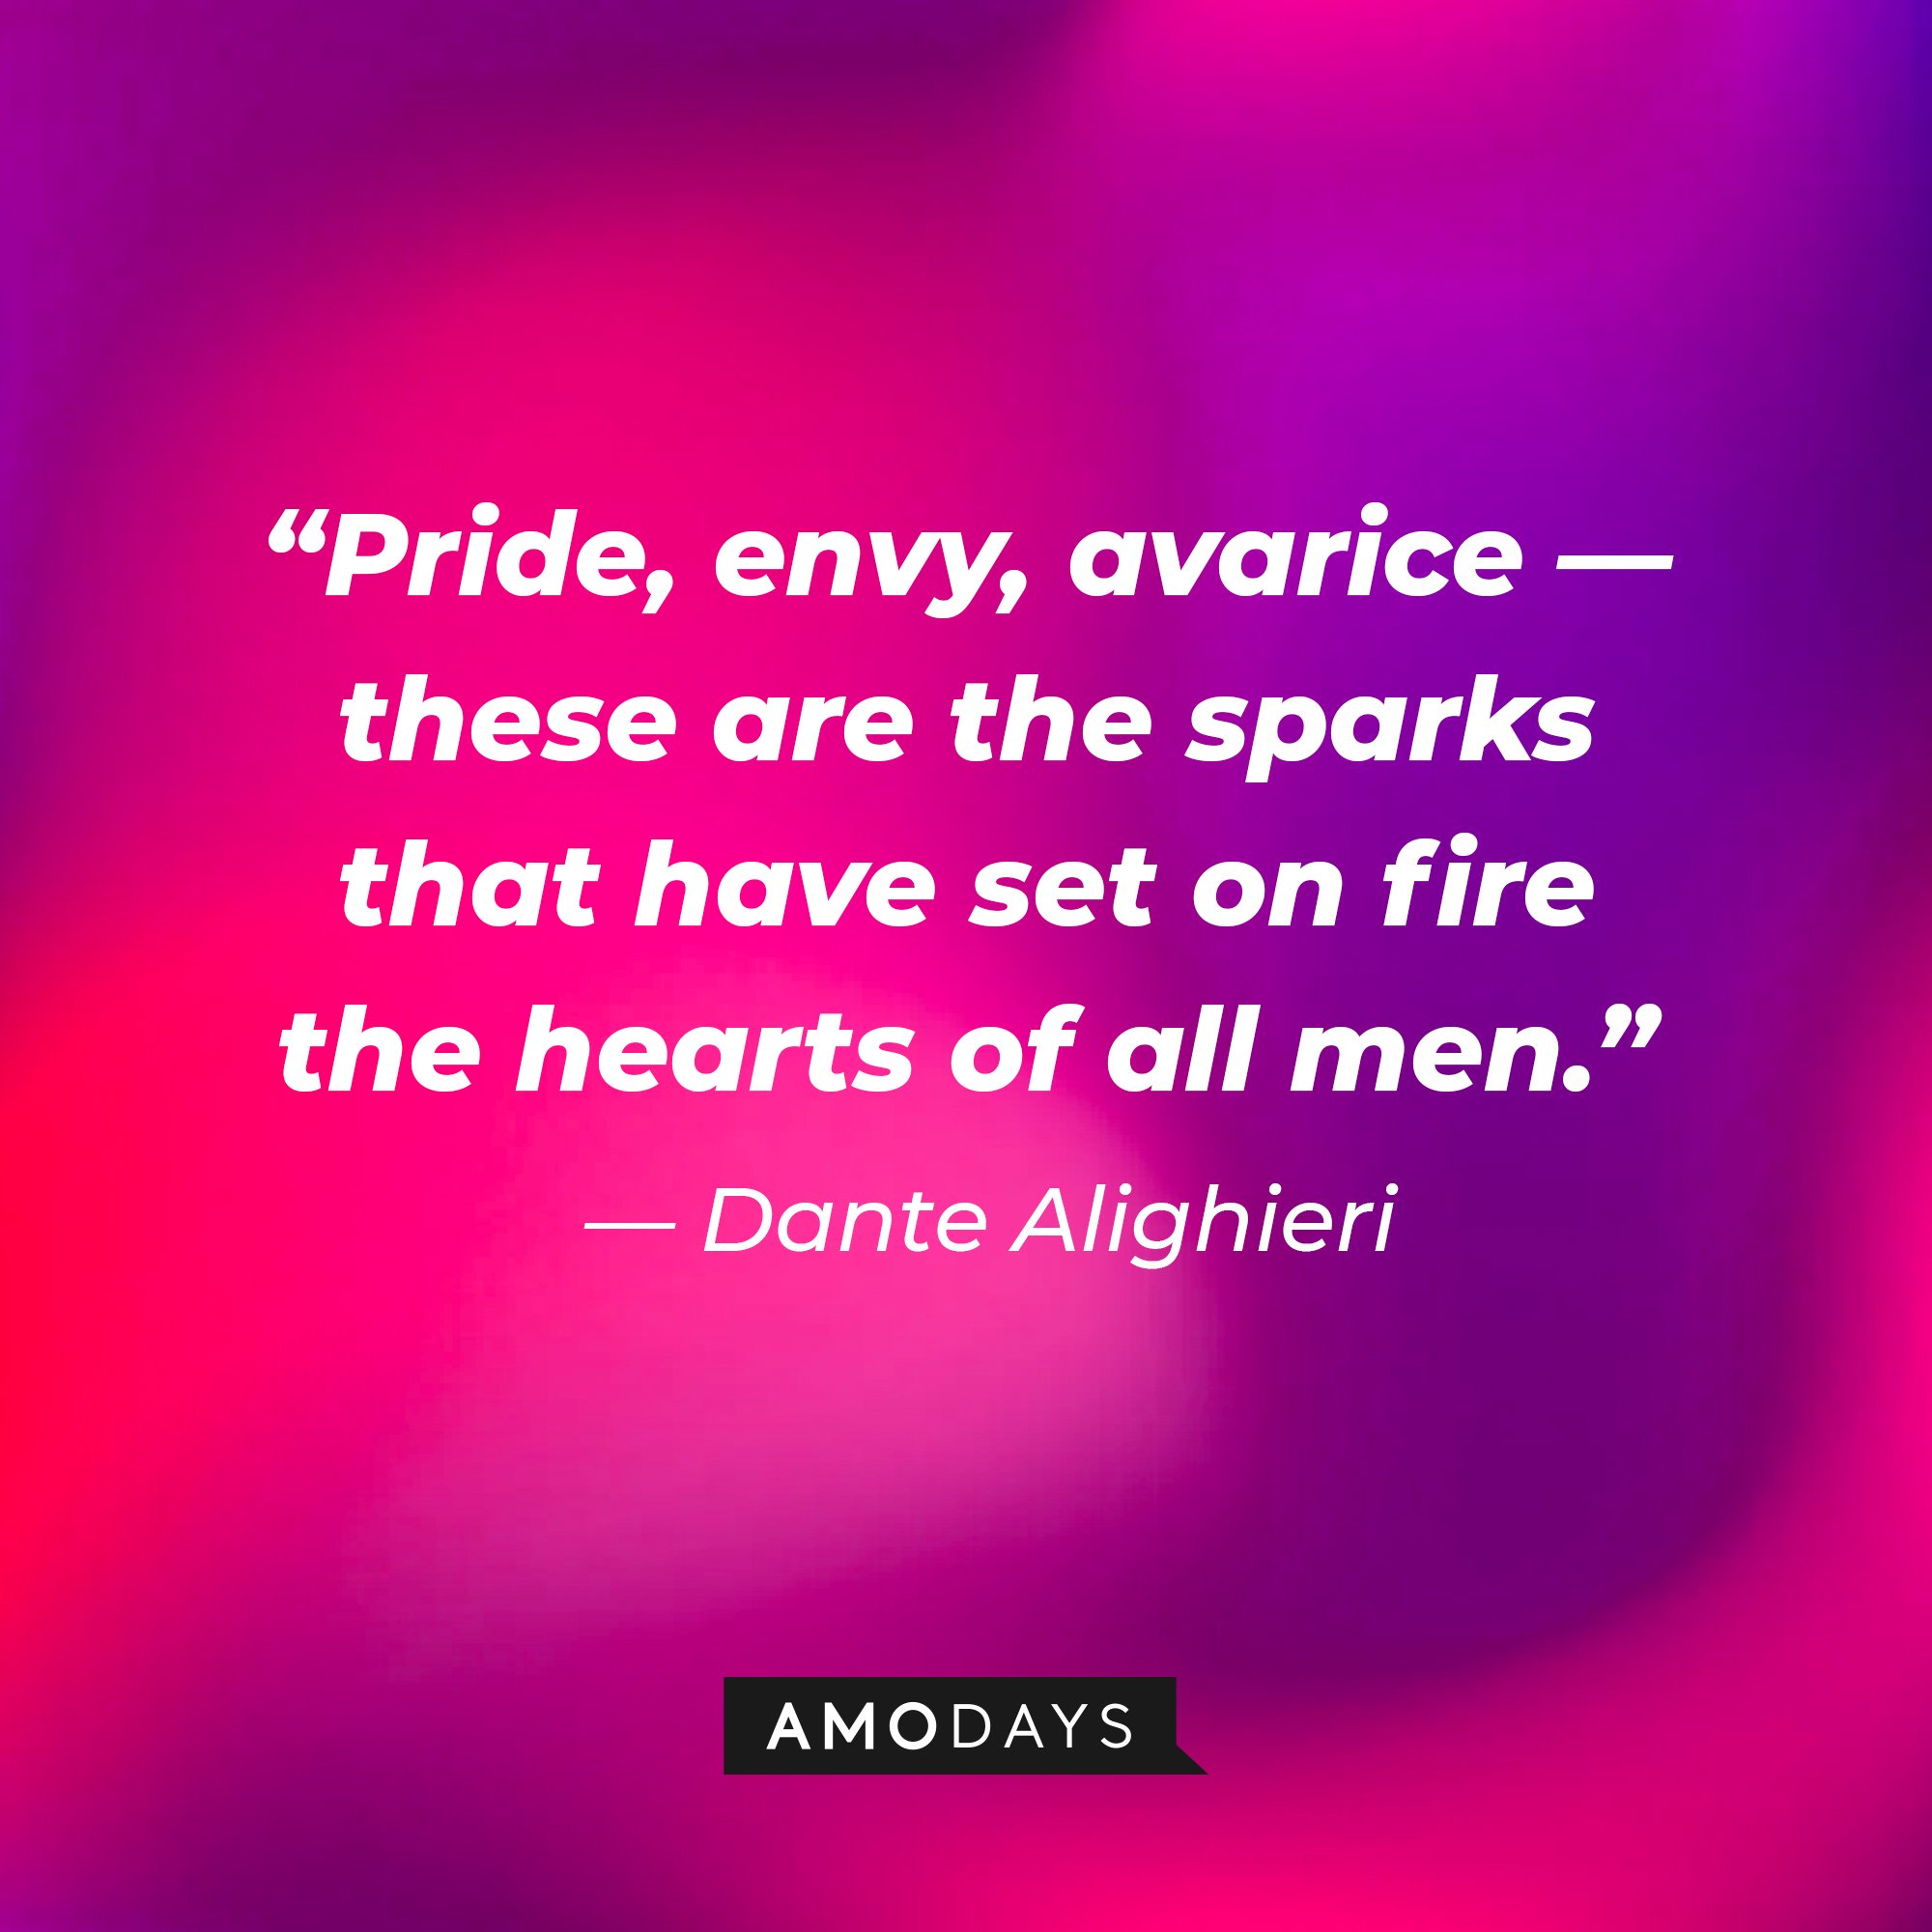  Dante Alighieri's quote: “Pride, envy, avarice — these are the sparks that have set on fire the hearts of all men.” | Image: AmoDays